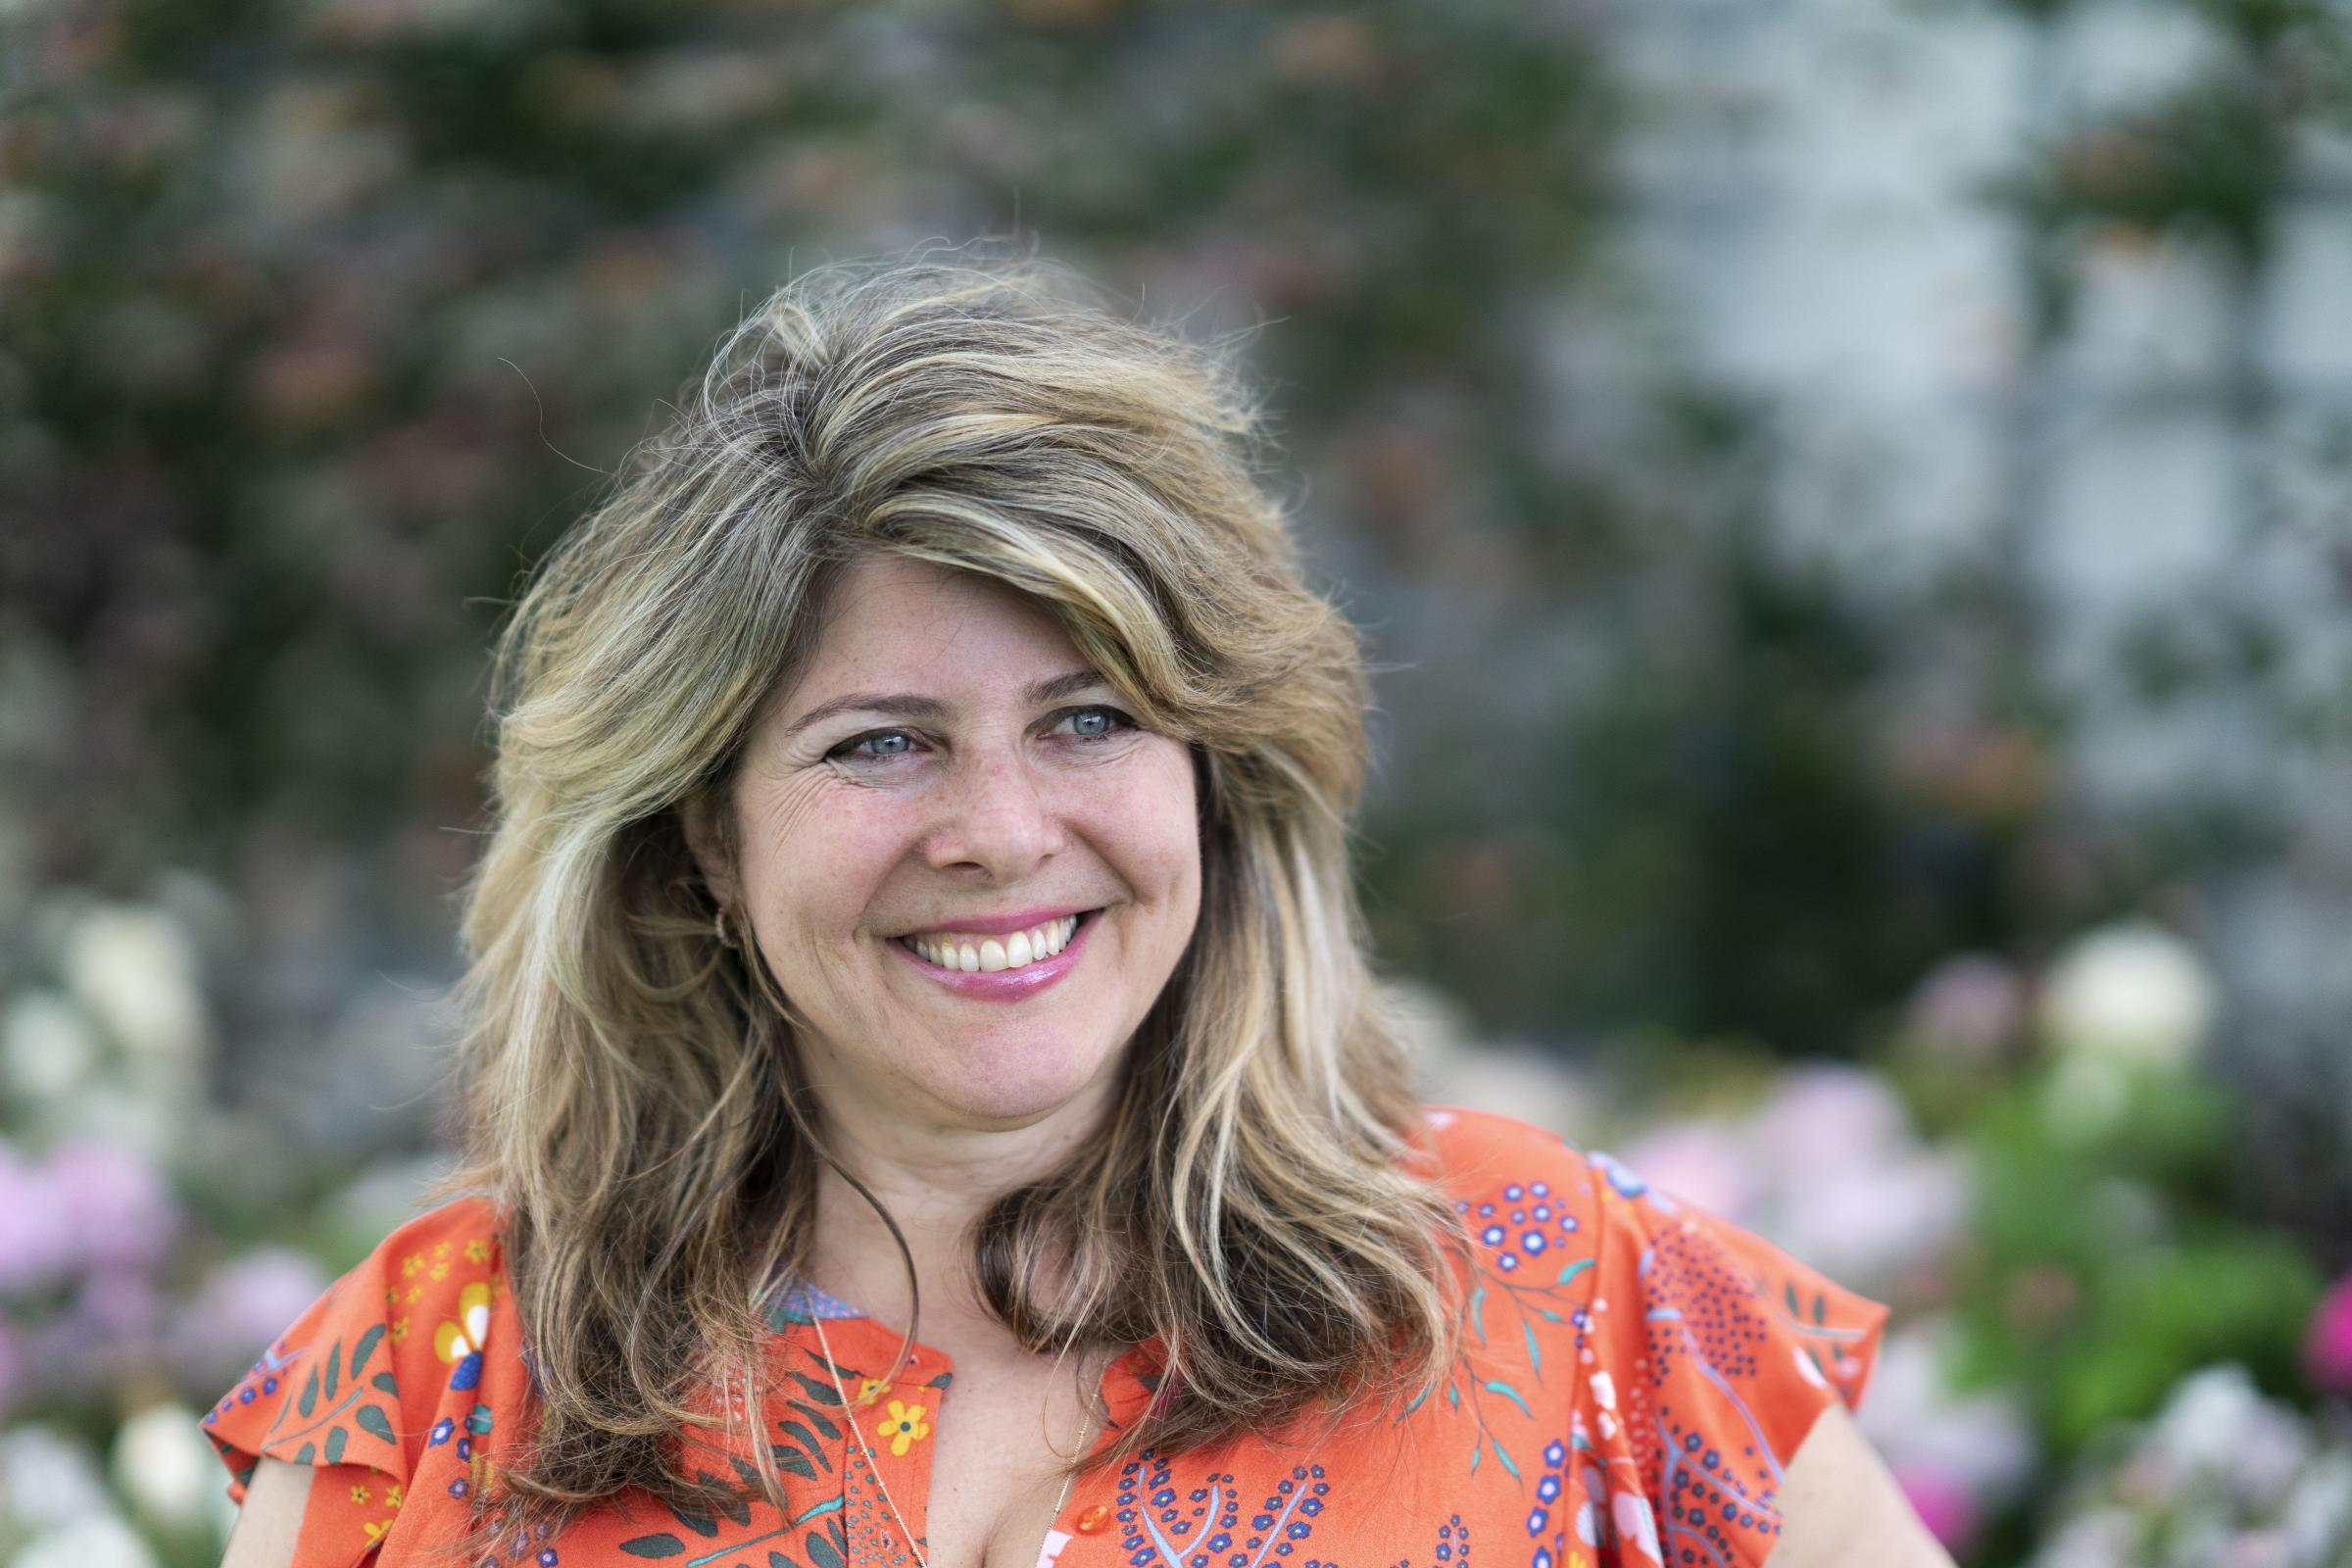 American academic and author Dr Naomi Wolf